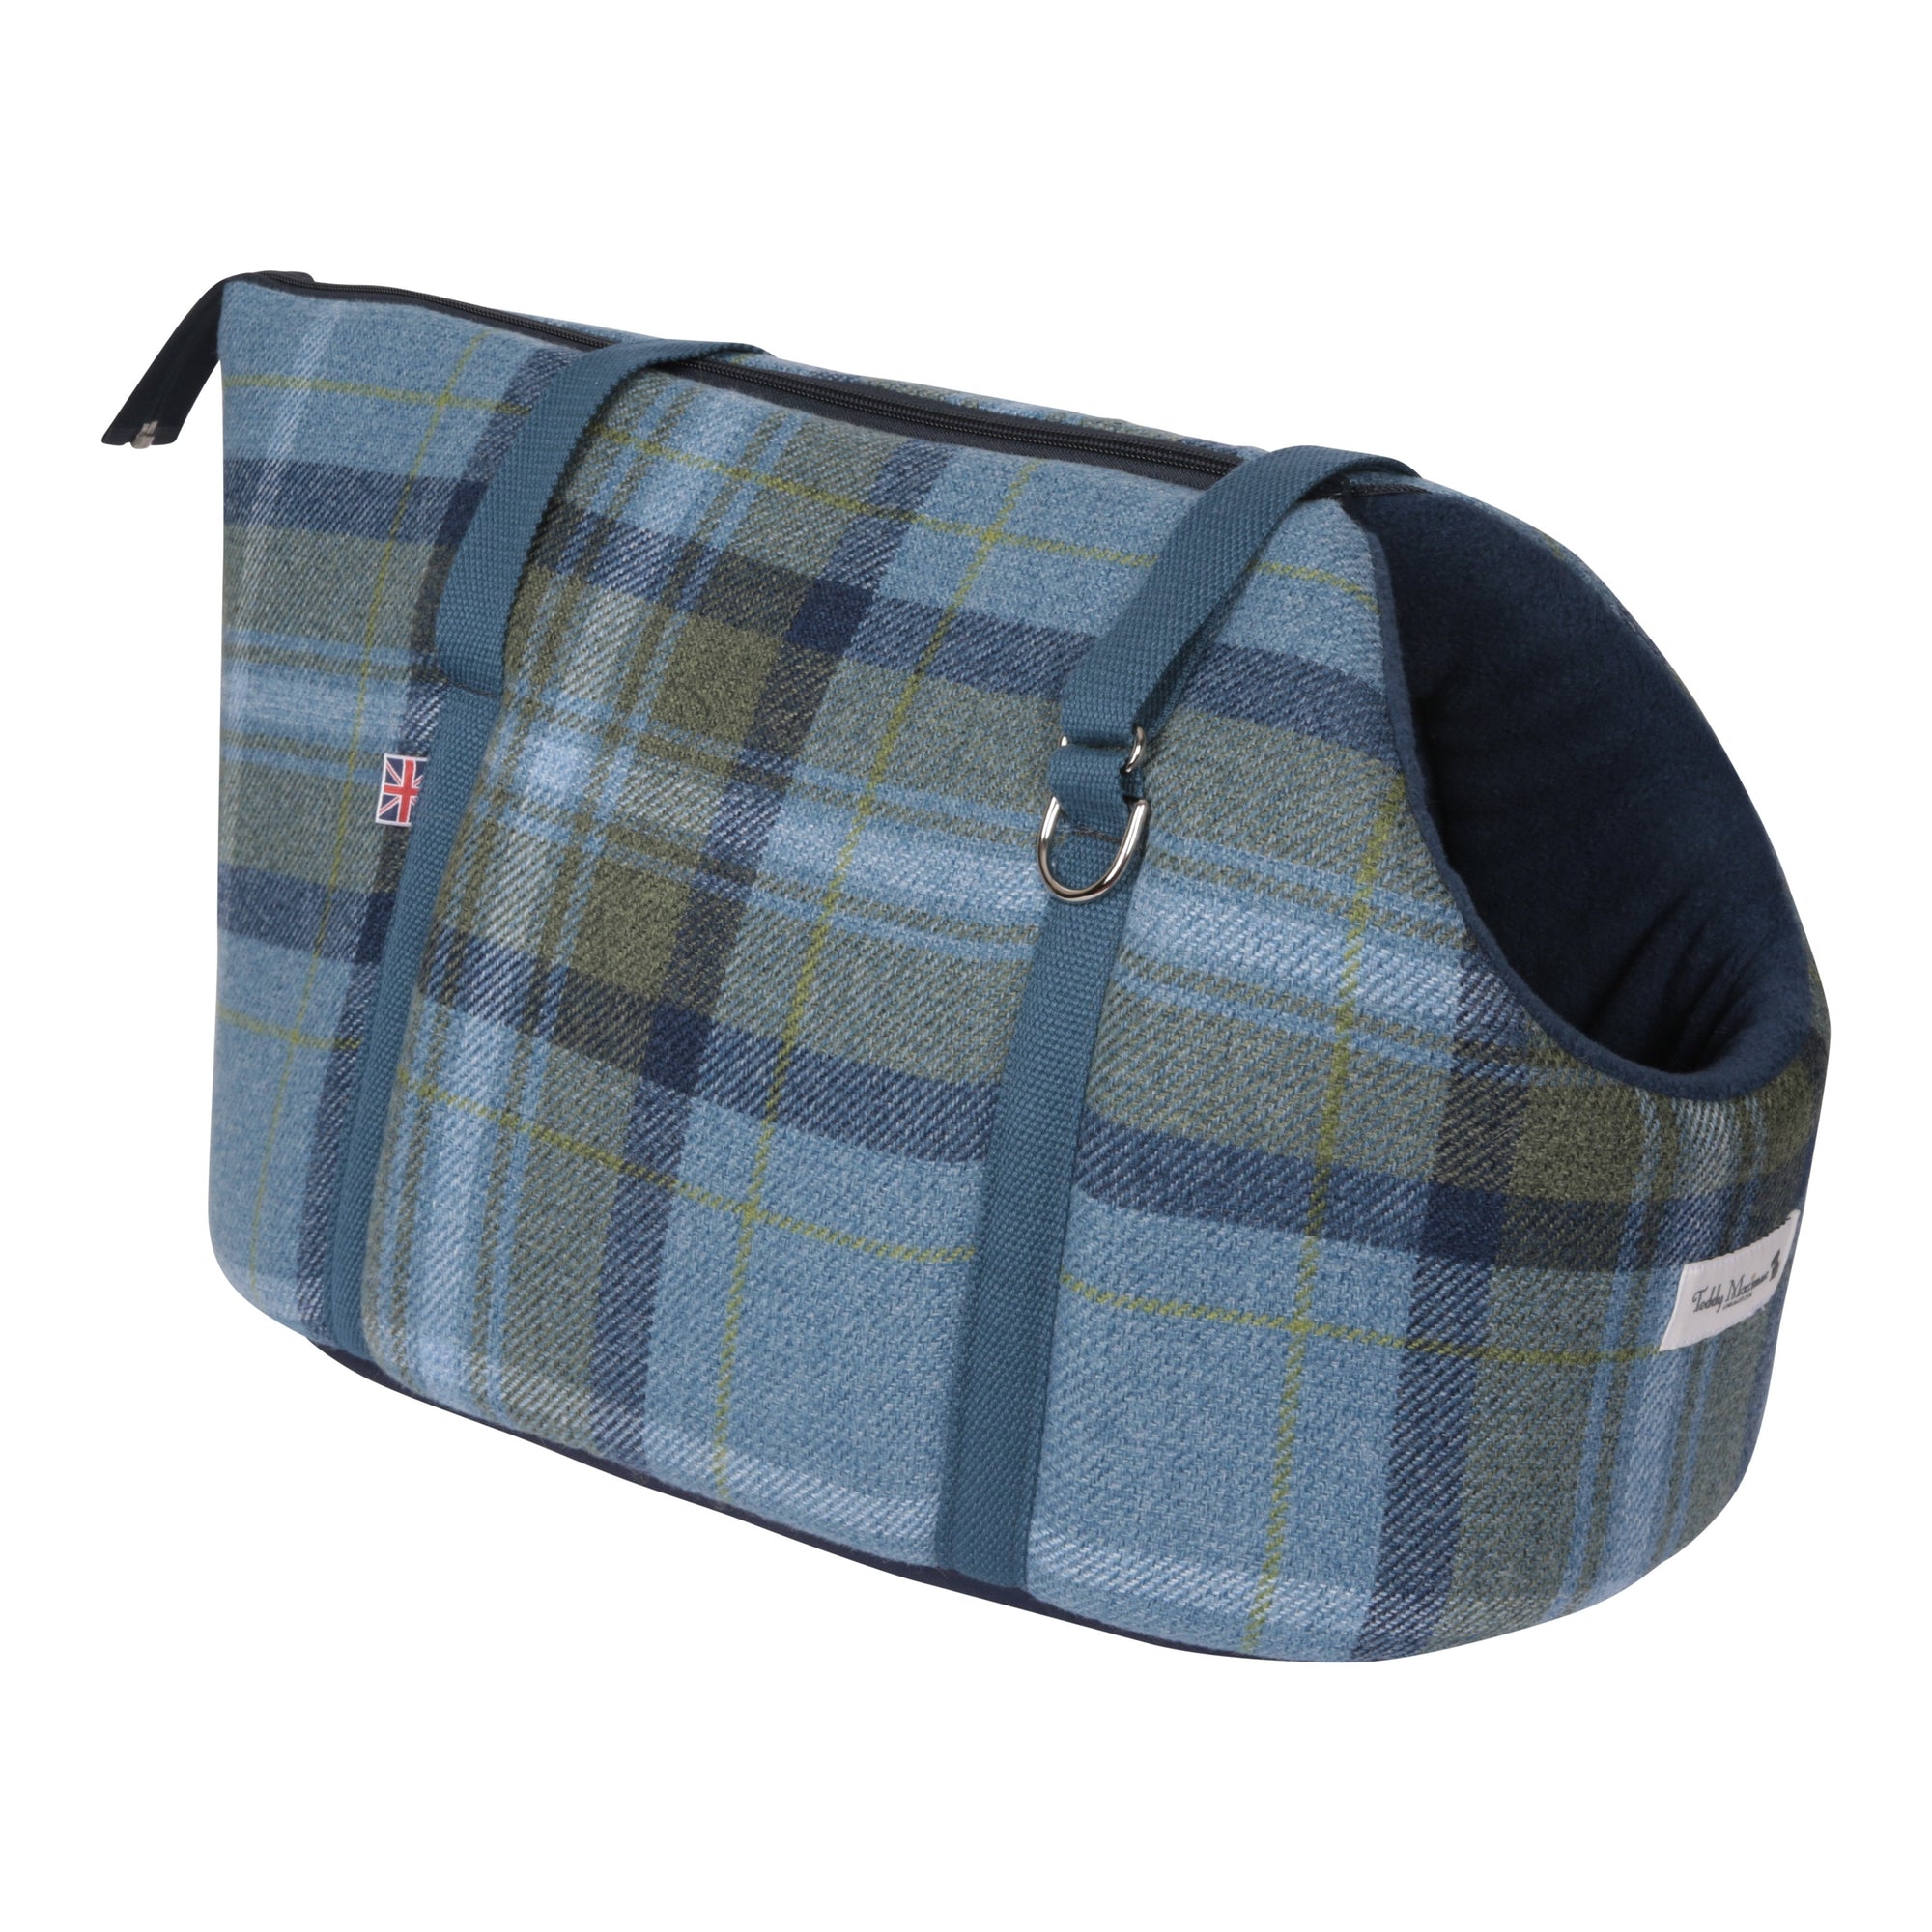 'The Cotswold Blue' Plaid Dog Carrier NEW!!